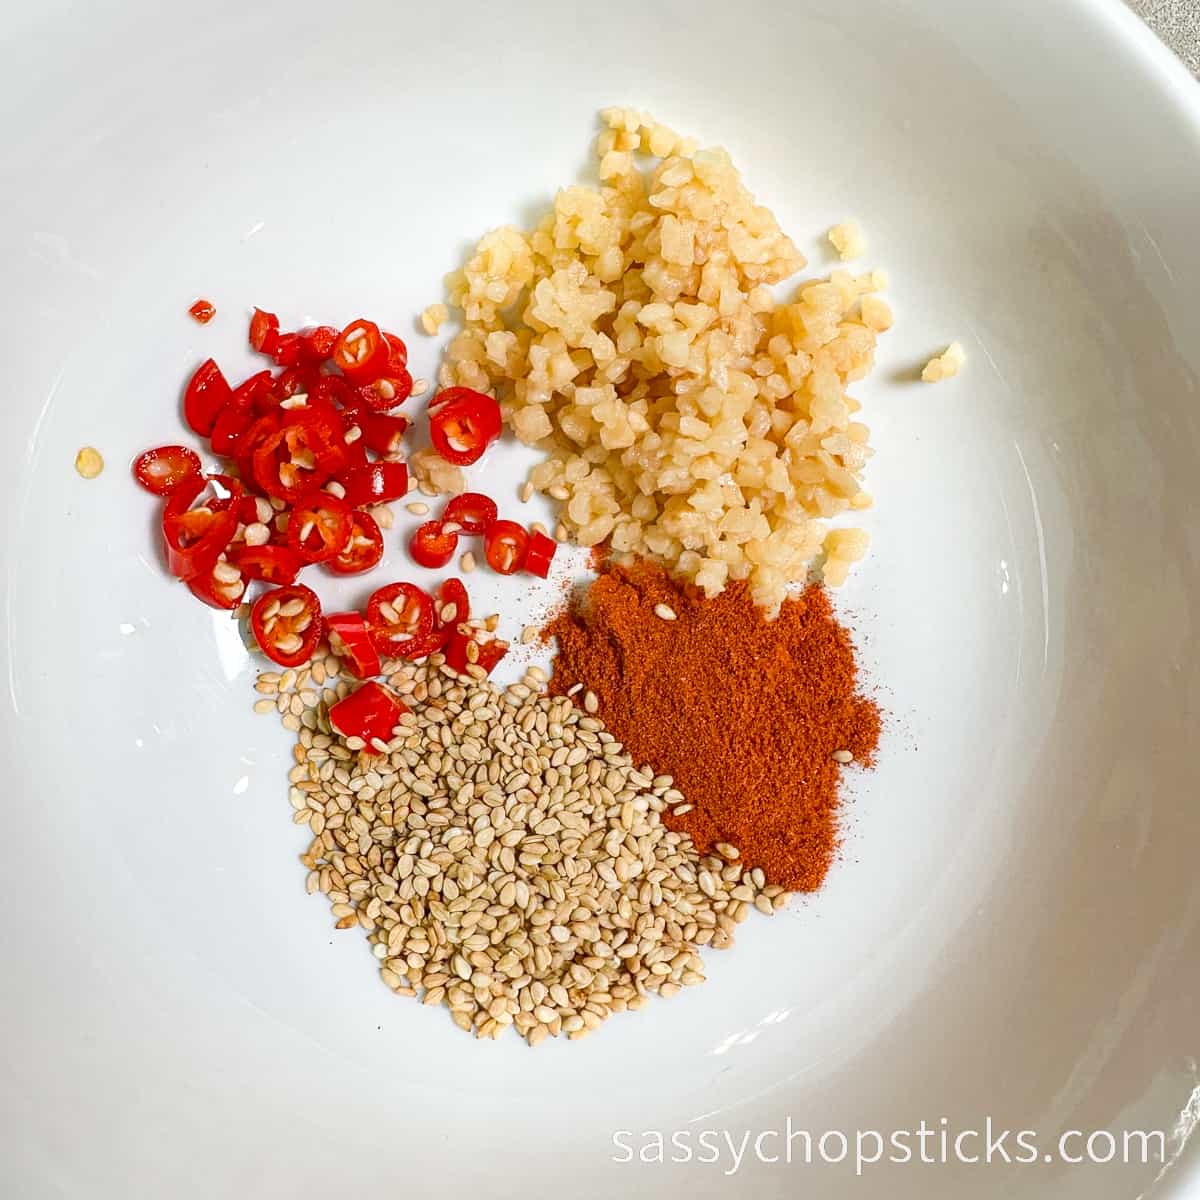 spices prior the hot oil